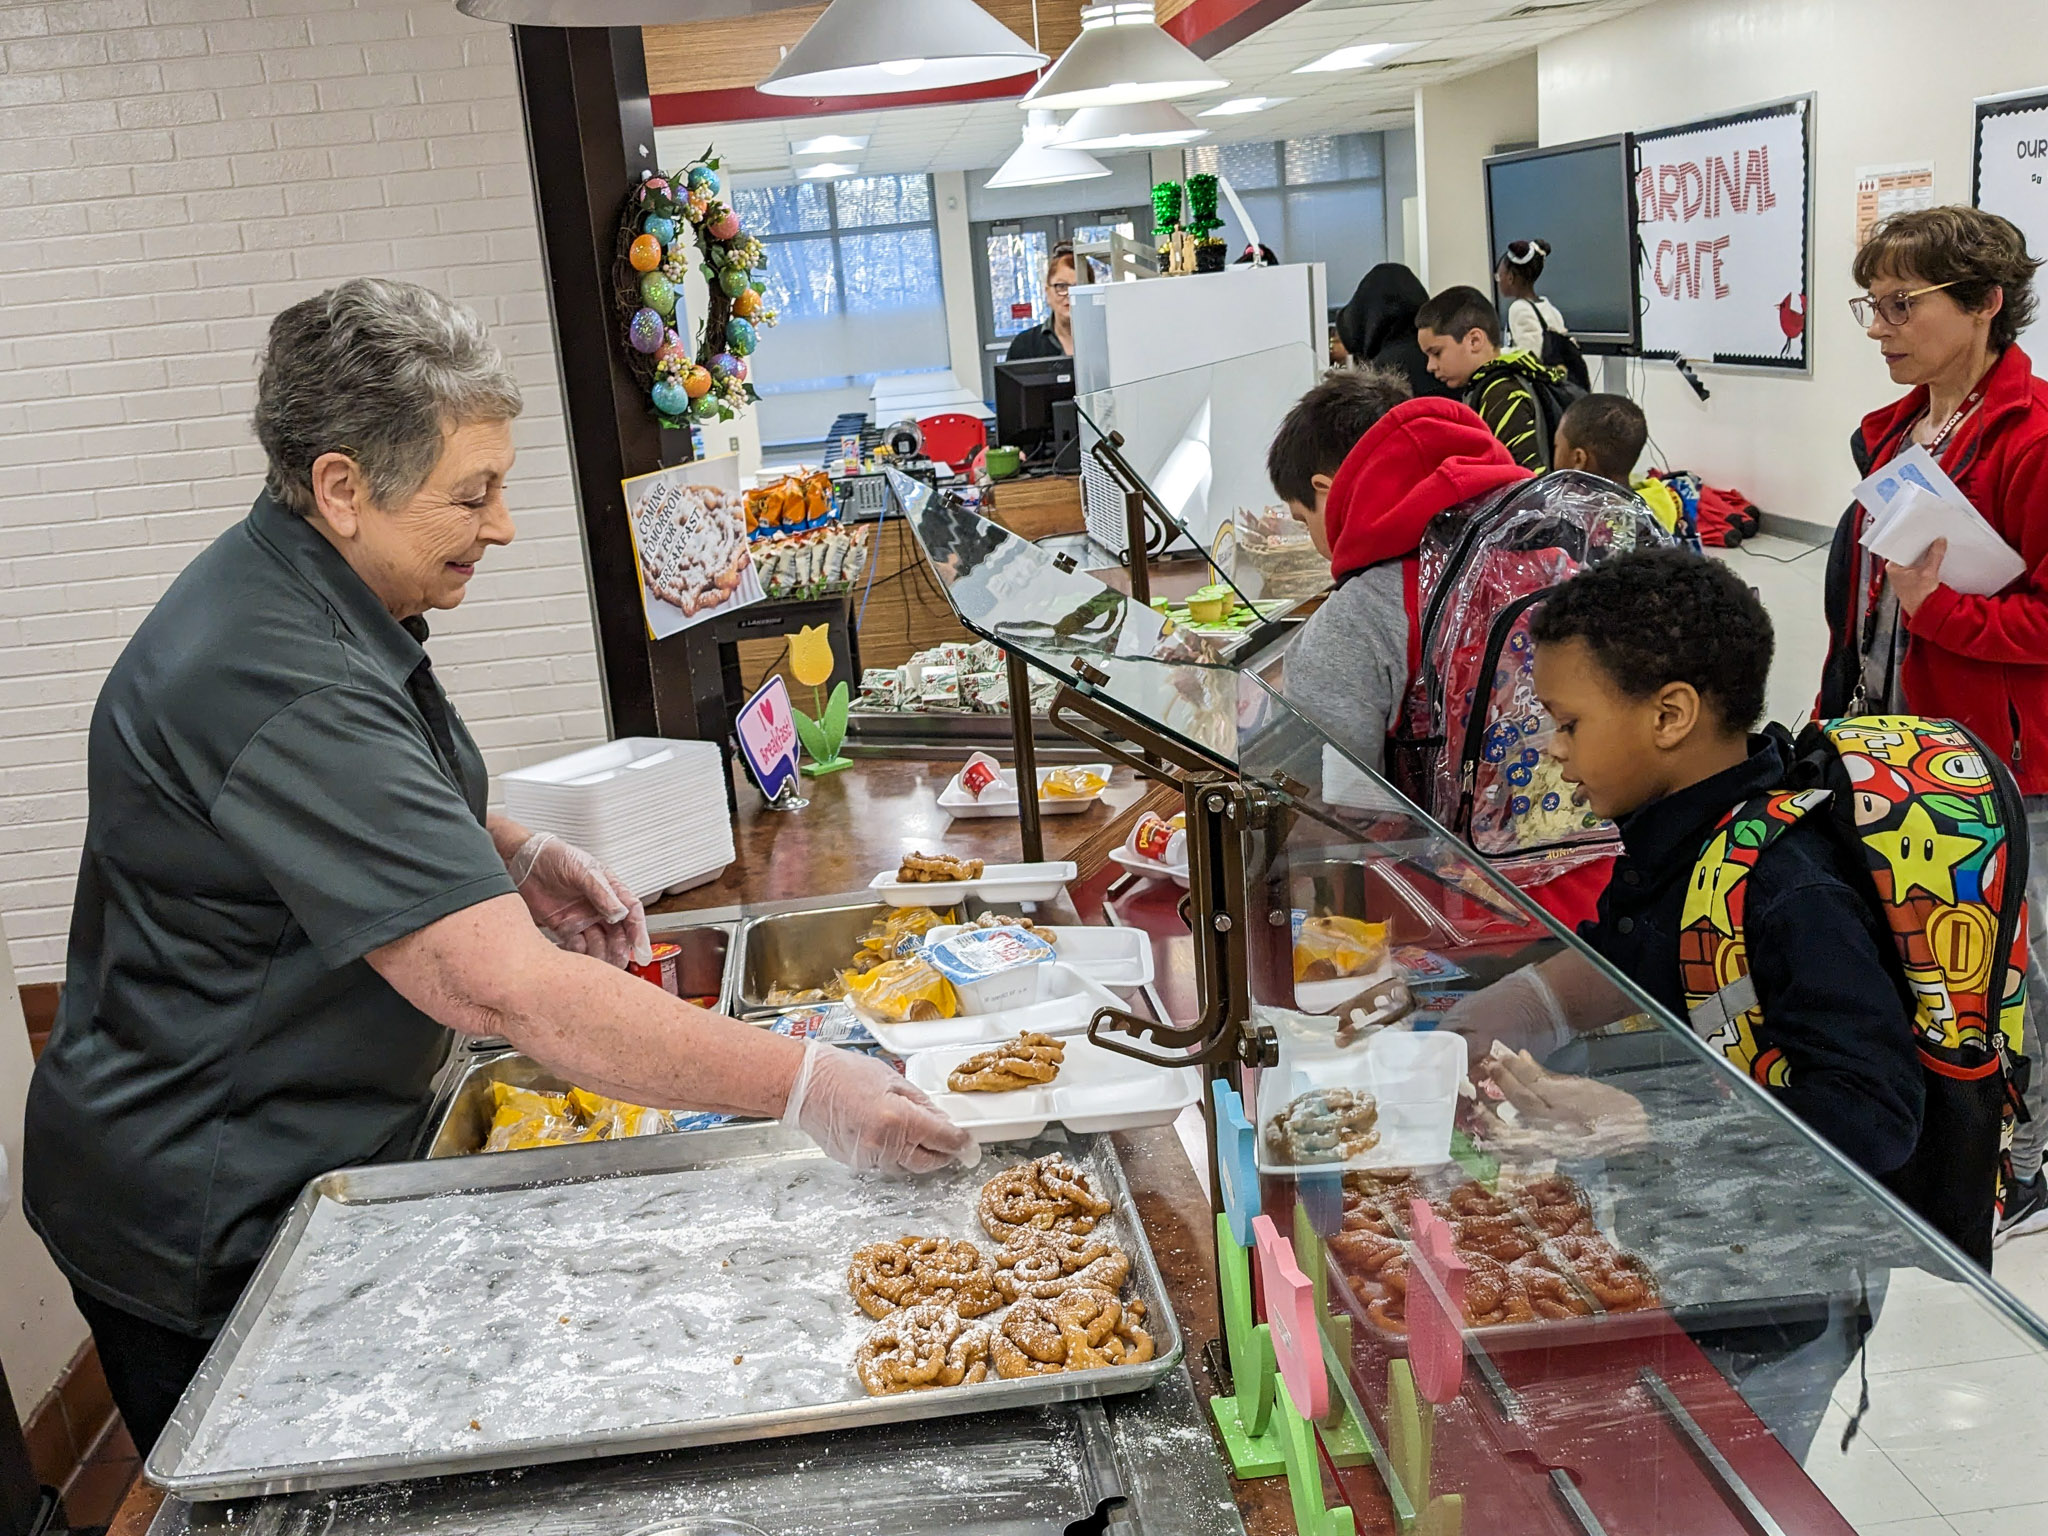 A nutrition specialist serves students breakfast in a school cafeteria